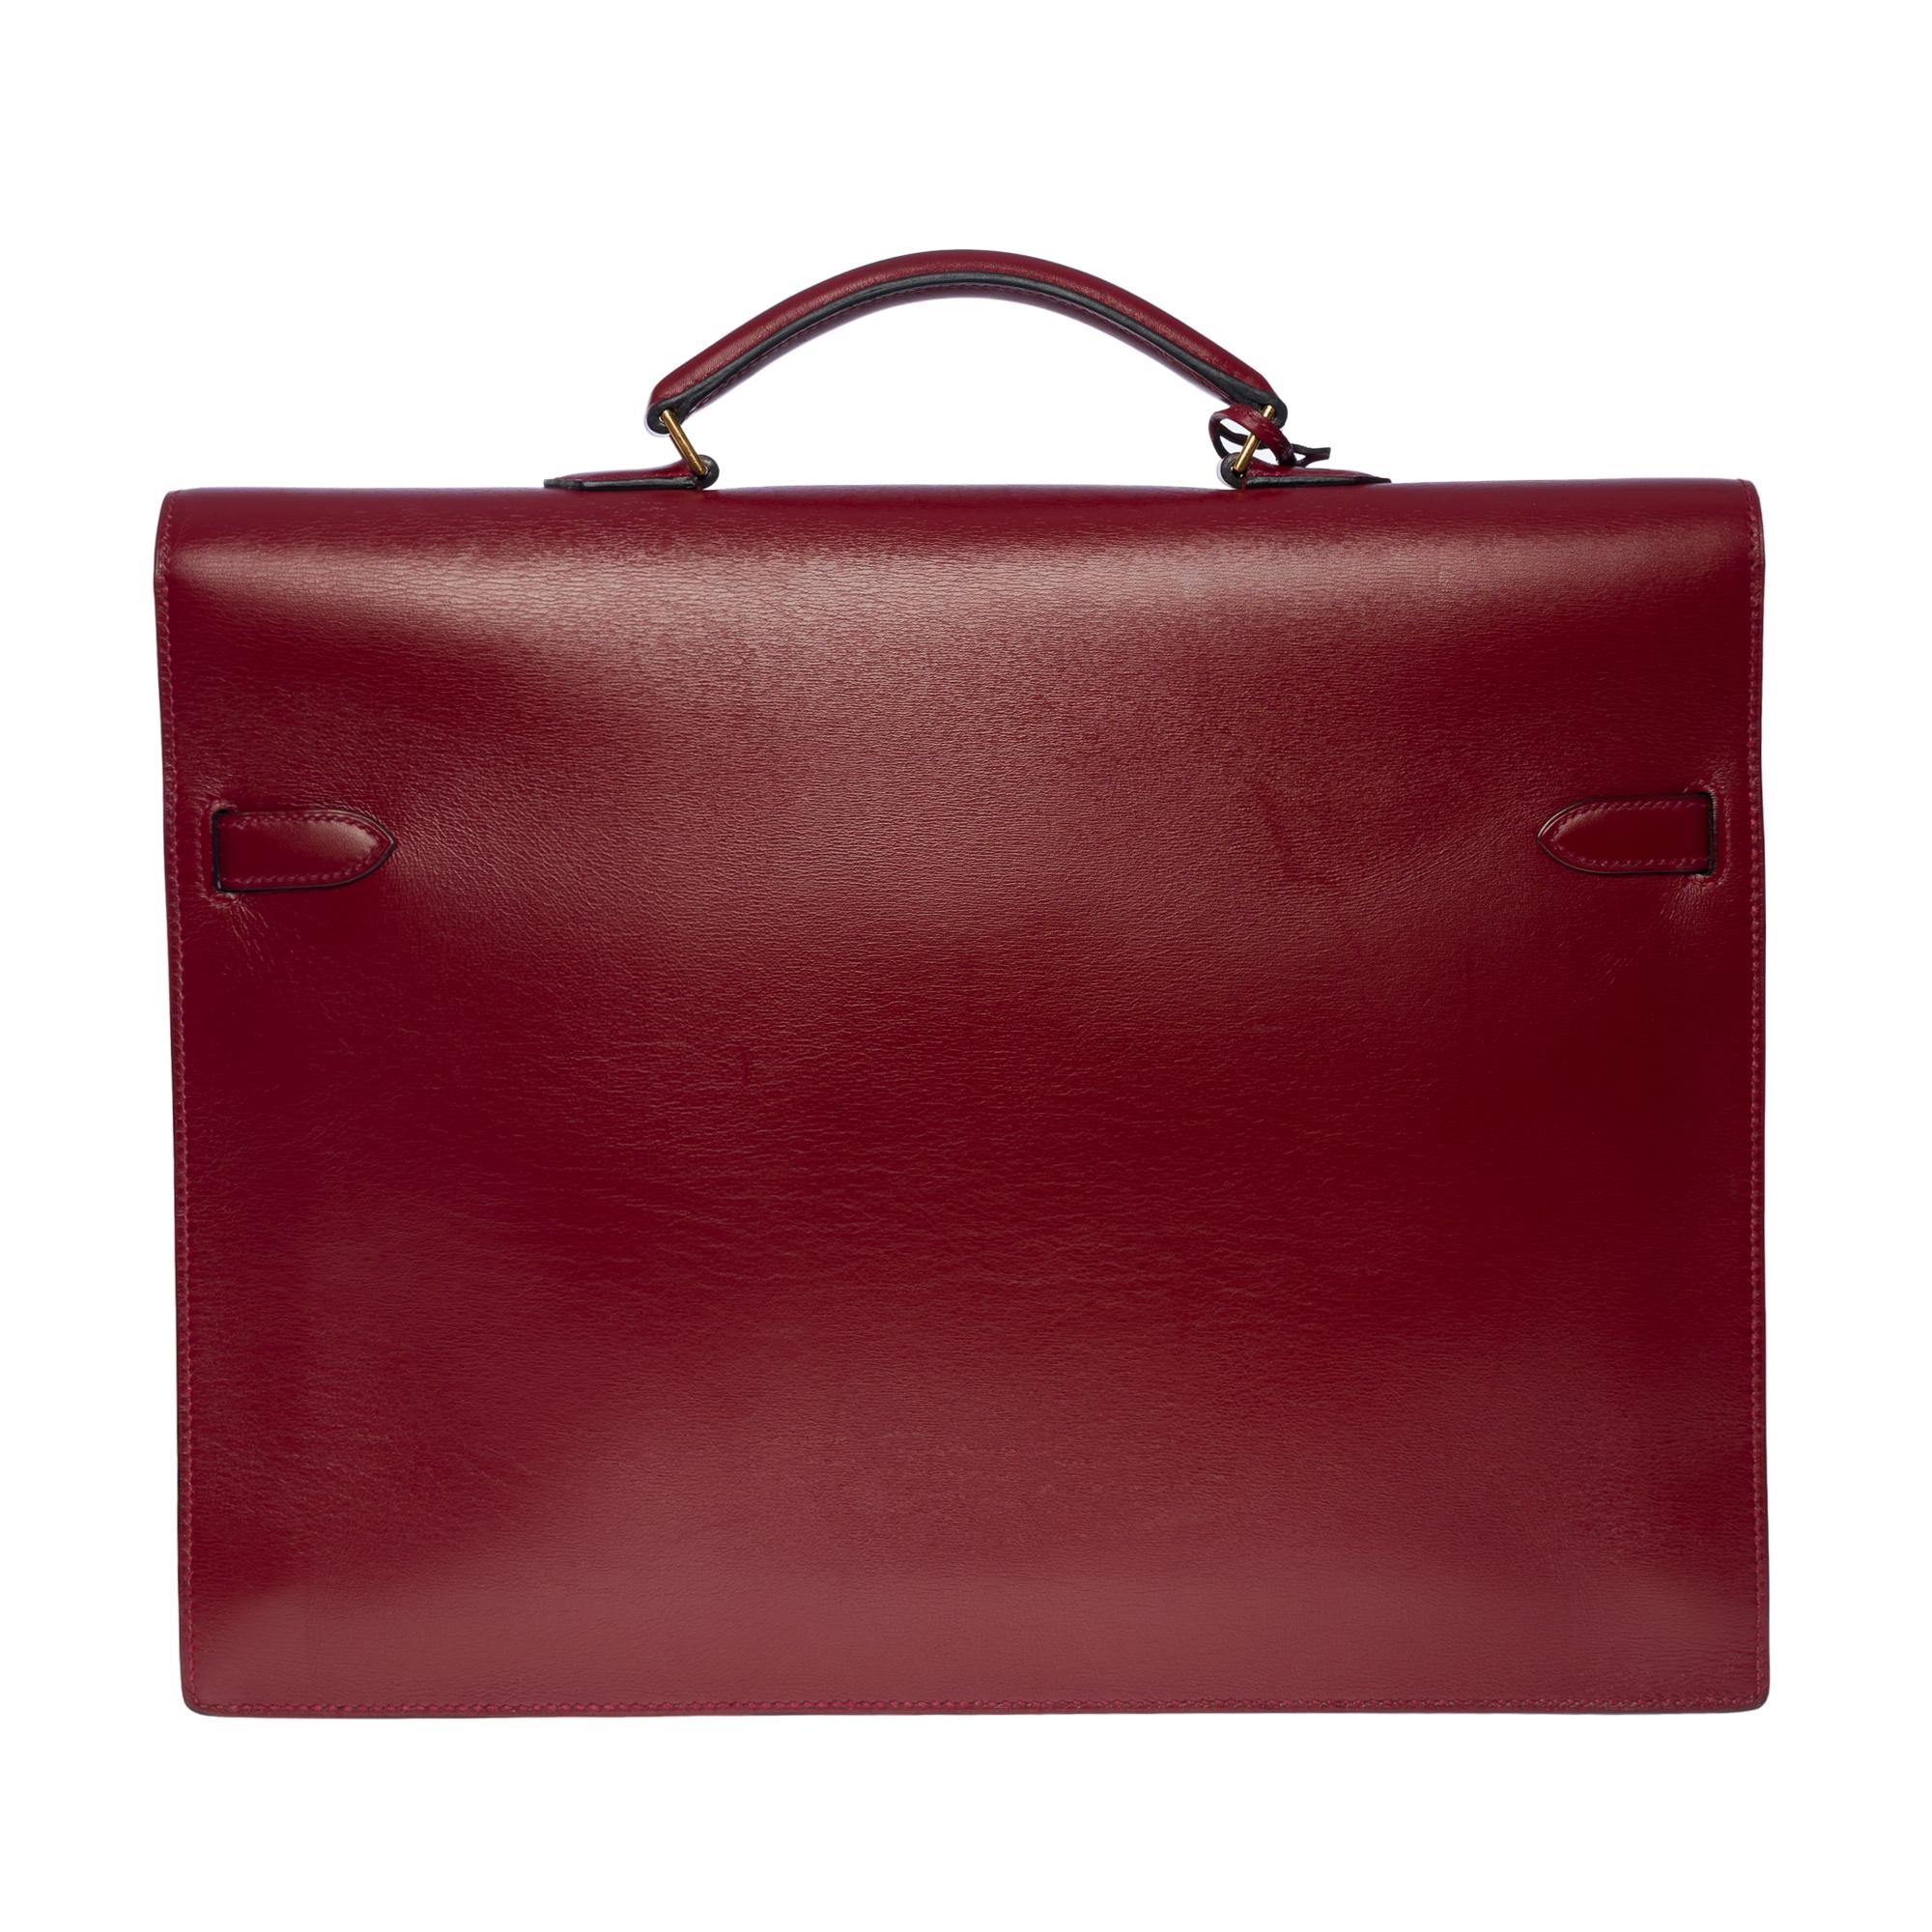 Very refined & Rare Hermès Kelly Dépêches in red H box calf leather (burgundy), gold-plated metal hardware, simple red leather handle allowing a hand carry

Flap closure 
Red suede interior, 3 compartments
Signature: 